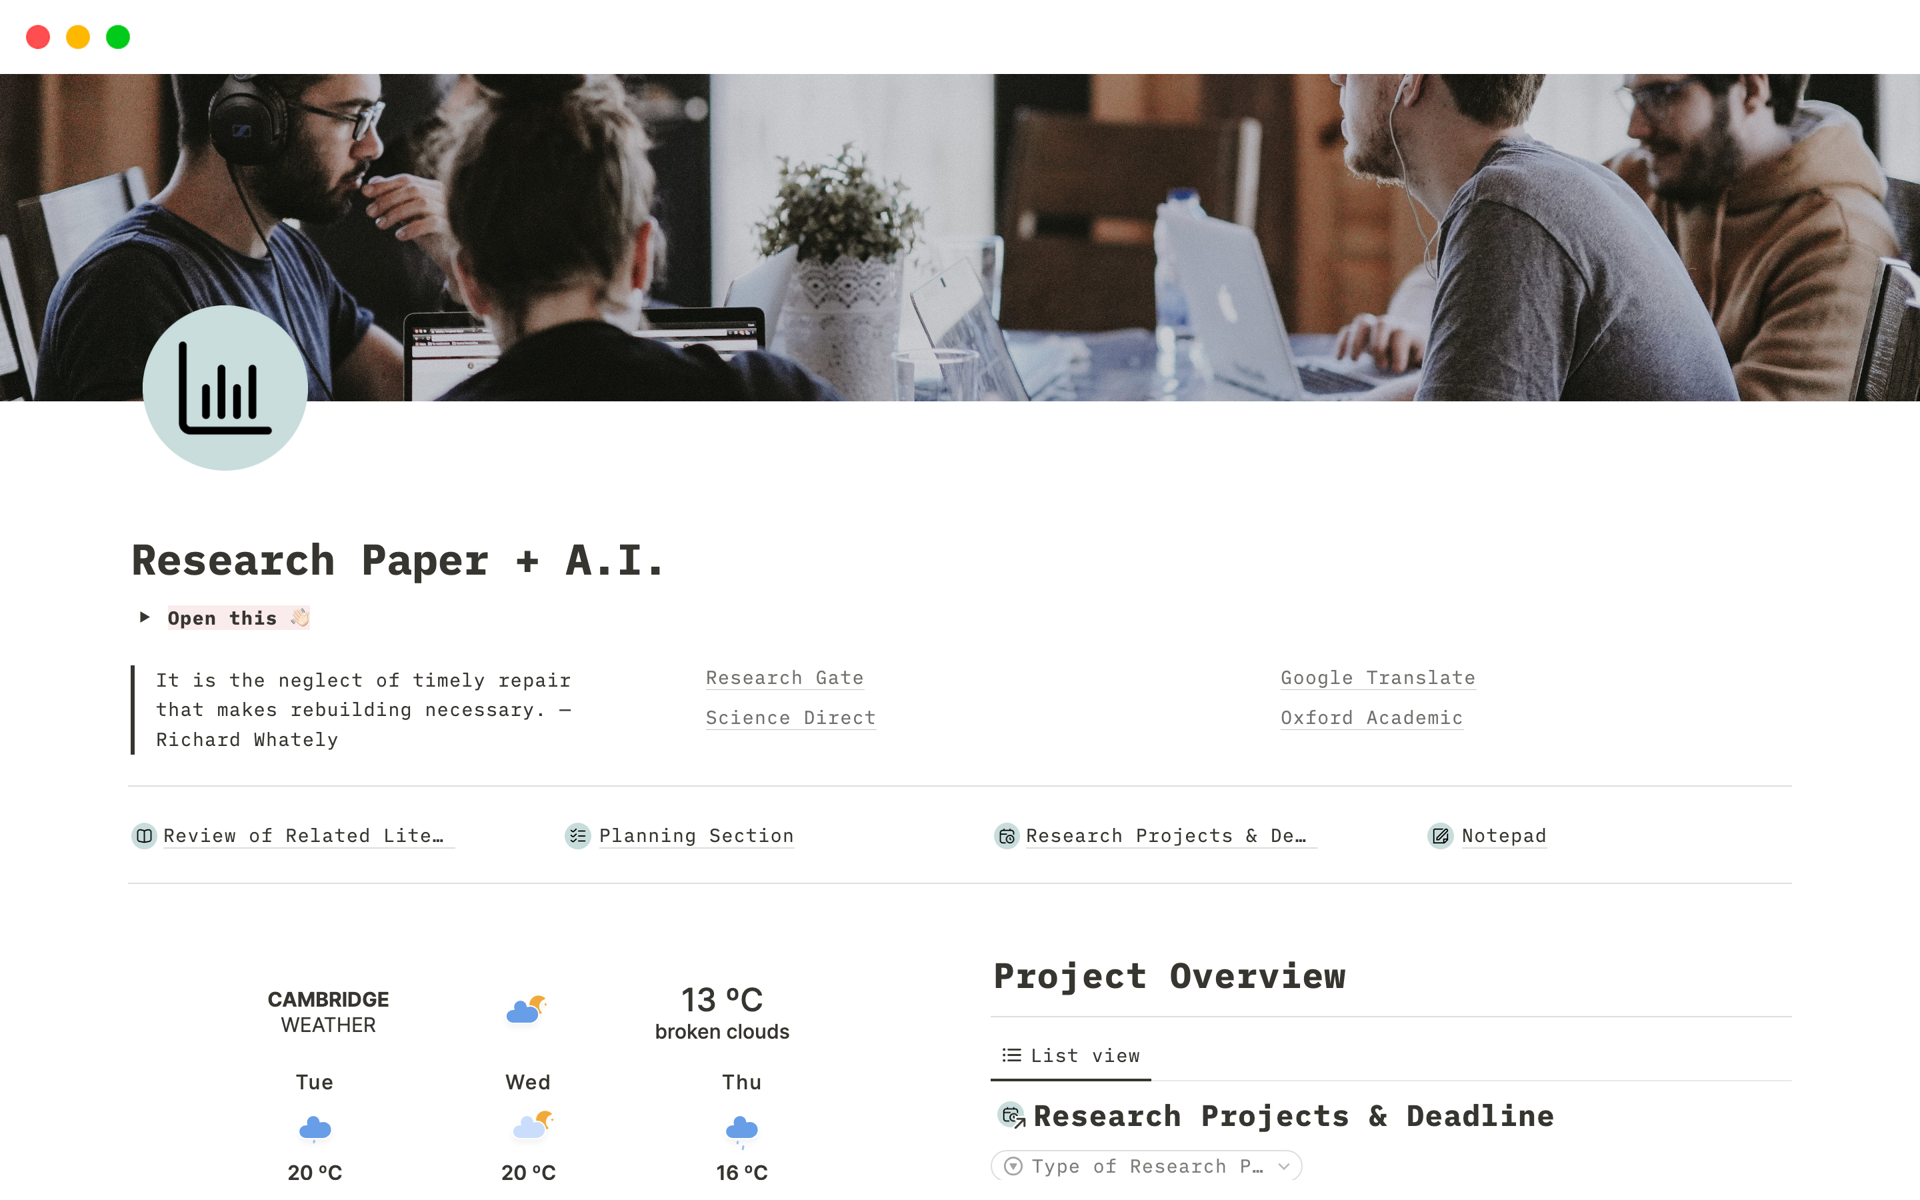 Research Paper + A.I. is designed to guide students in their research project with the help of A.I